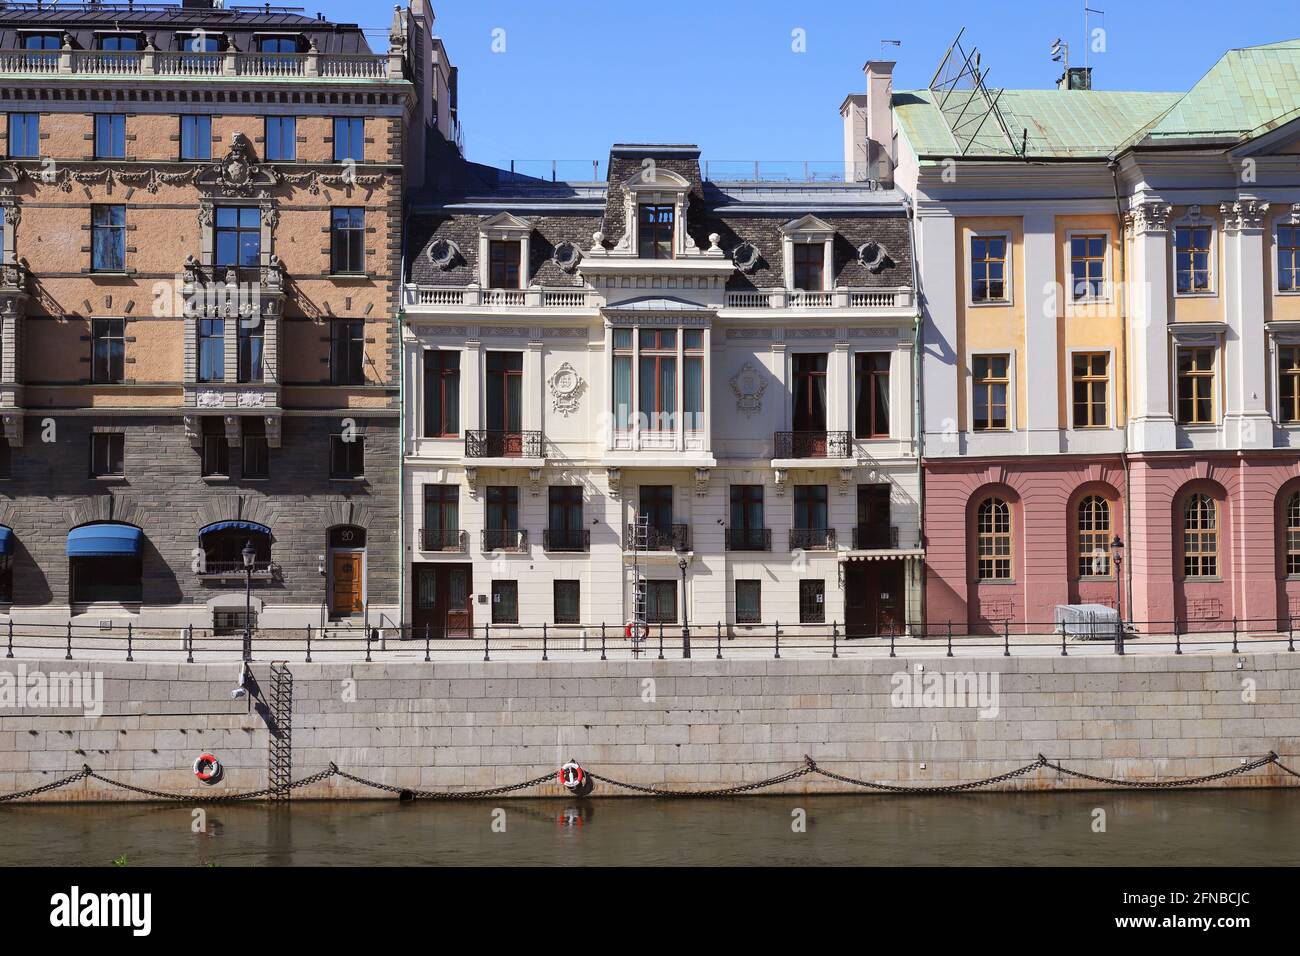 Stockholm, Sweden - May 12, 2021: The Sager Palace at Stromgatan 18 street is the official residence of the prime minister of Sweden. Stock Photo